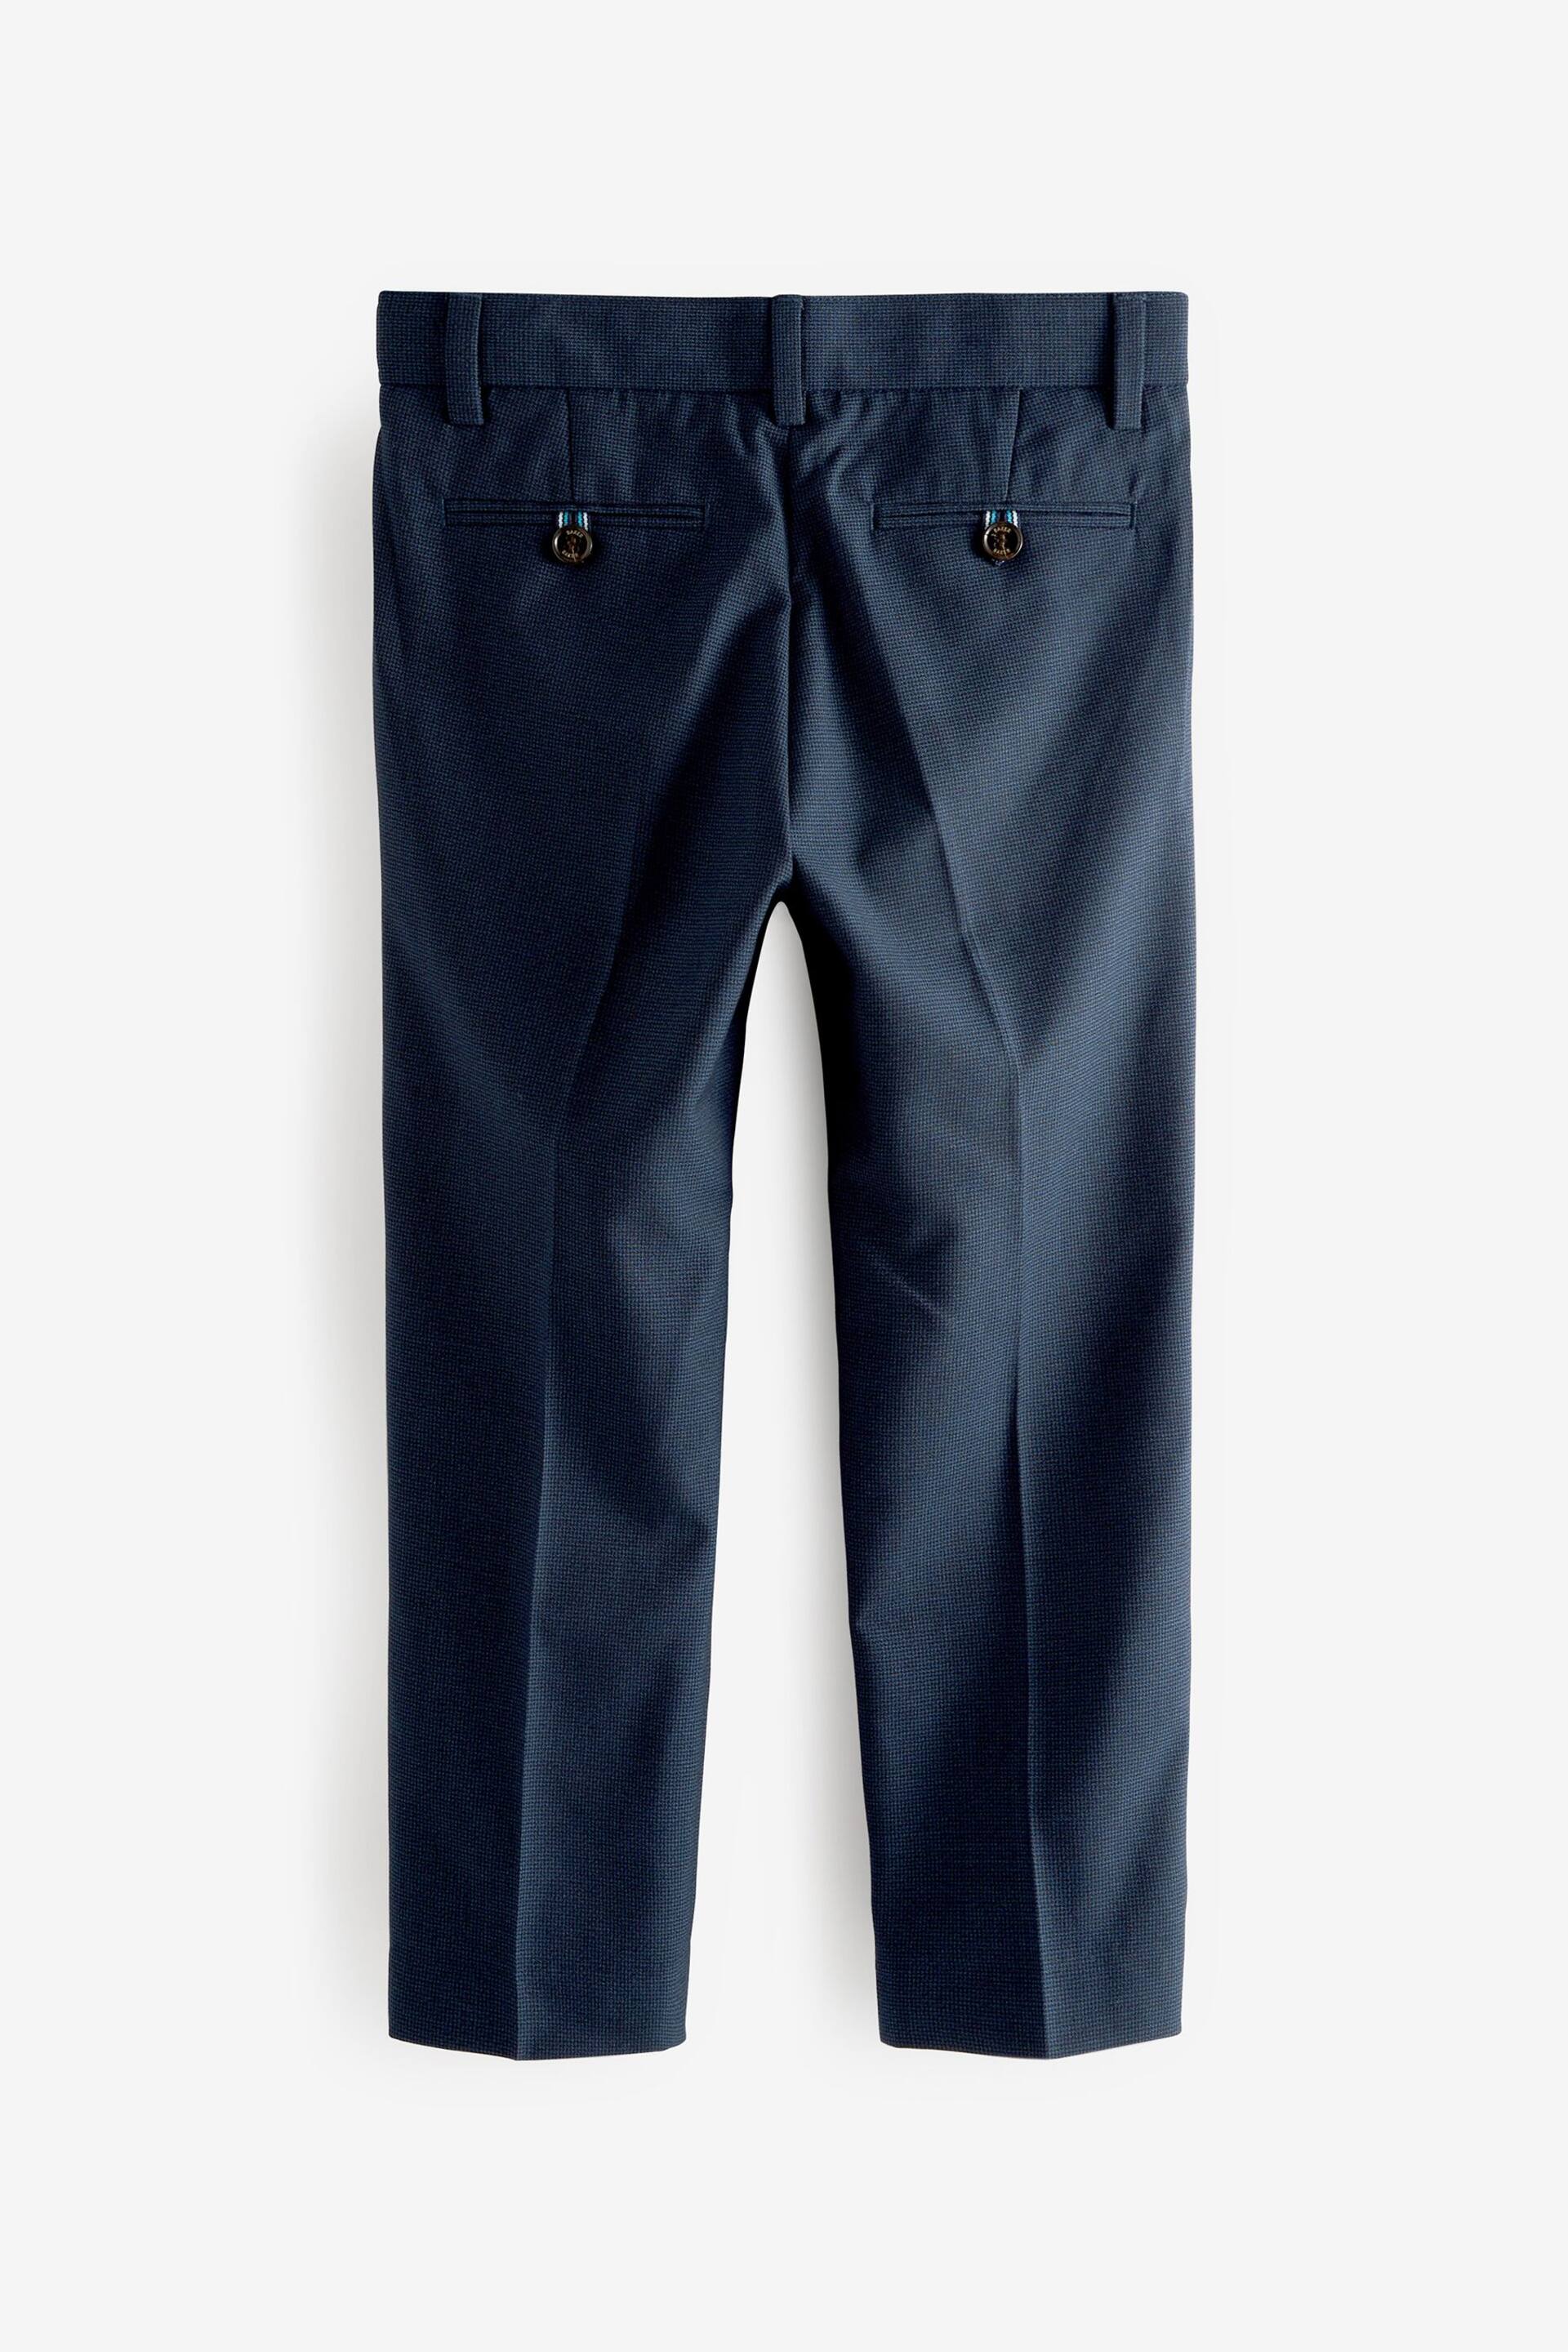 Baker by Ted Baker Suit Trousers - Image 4 of 5